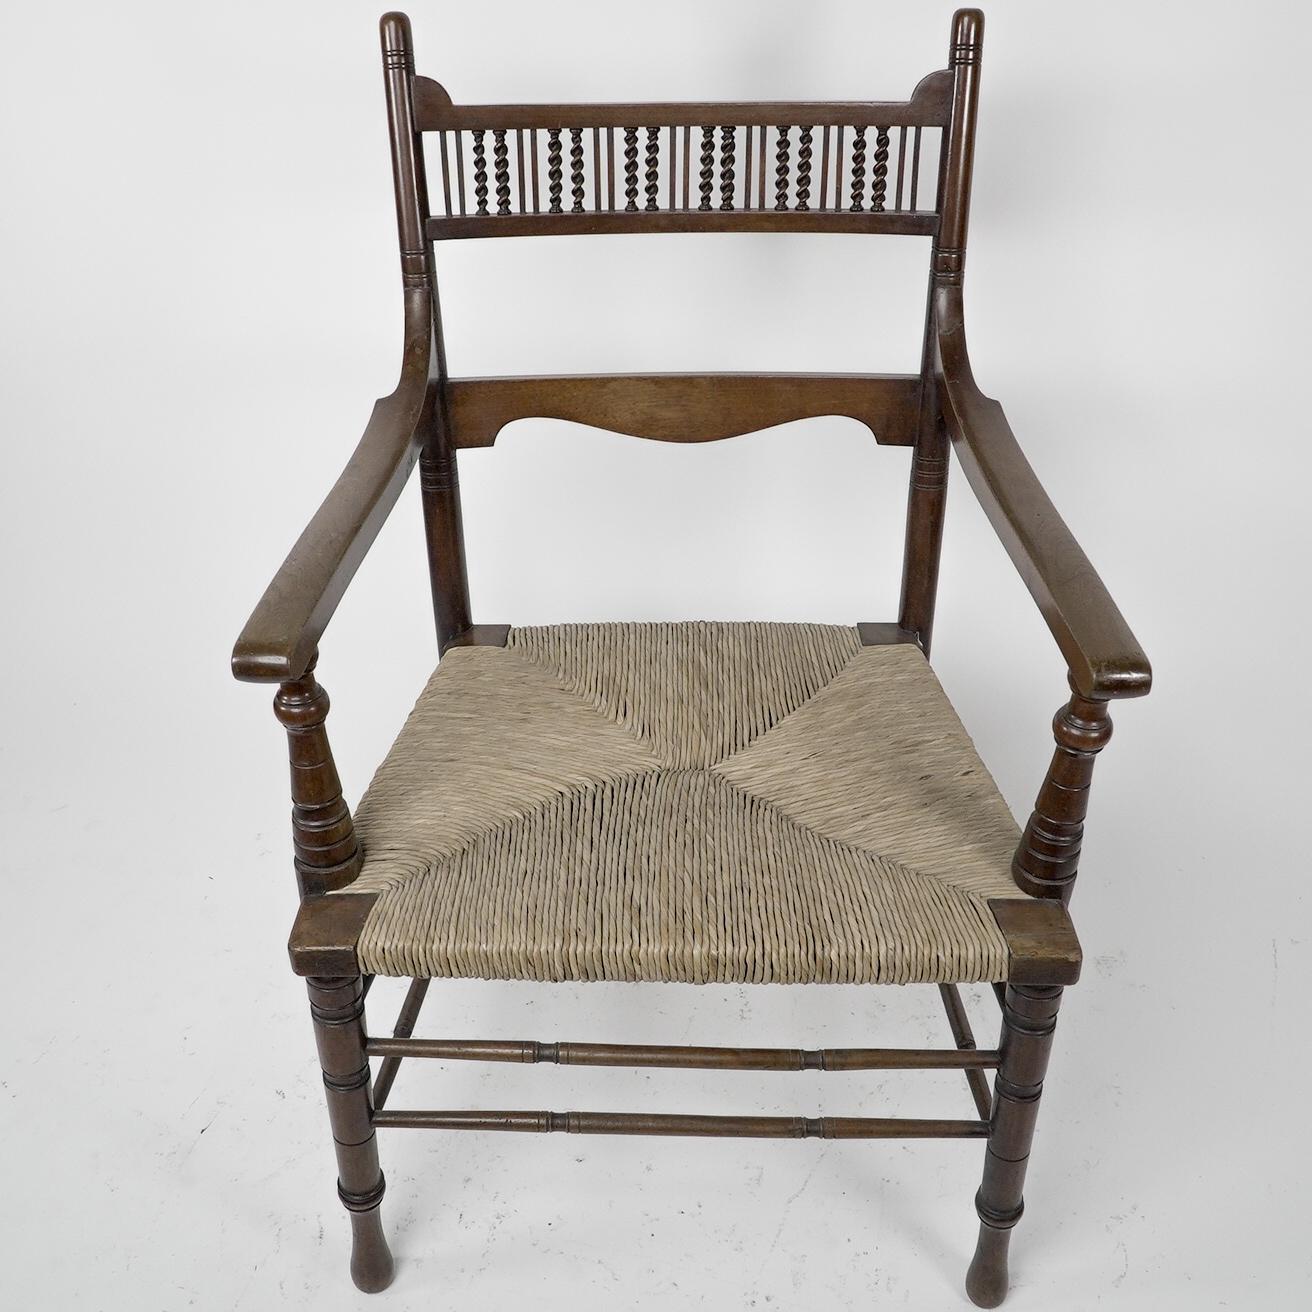 George Bell & George Freeth Roper. Probably made by Kendal Milne & Co for Herman Schill. An Aesthetic Movement Walnut armchair with a row of fine barley twist turnings to the upper back, and a shaped back rest below. The back legs curving back with